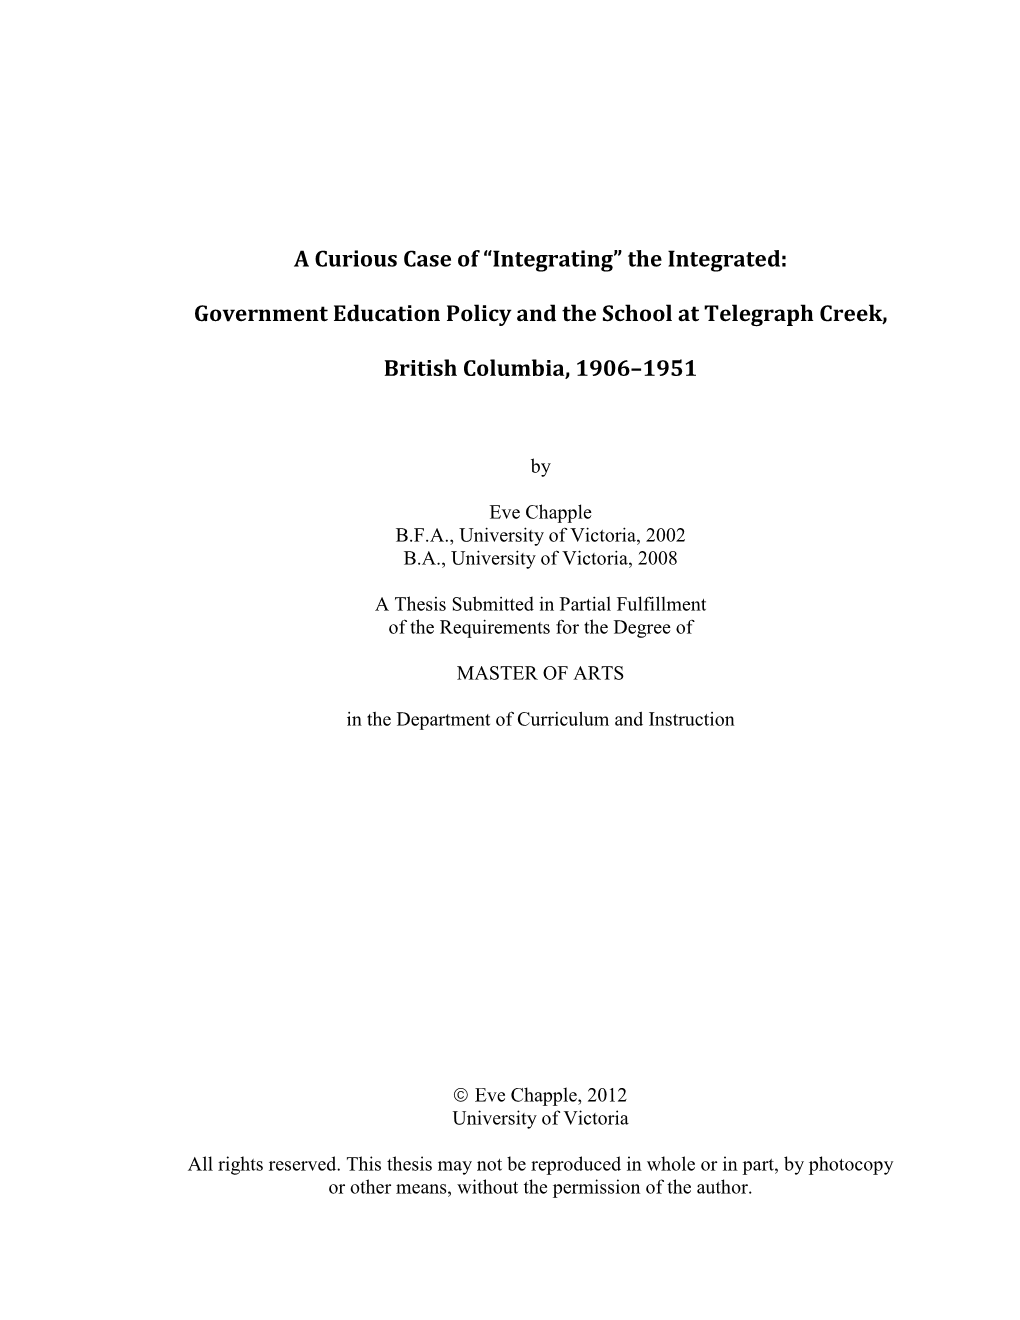 Government Education Policy and the School at Telegraph Creek